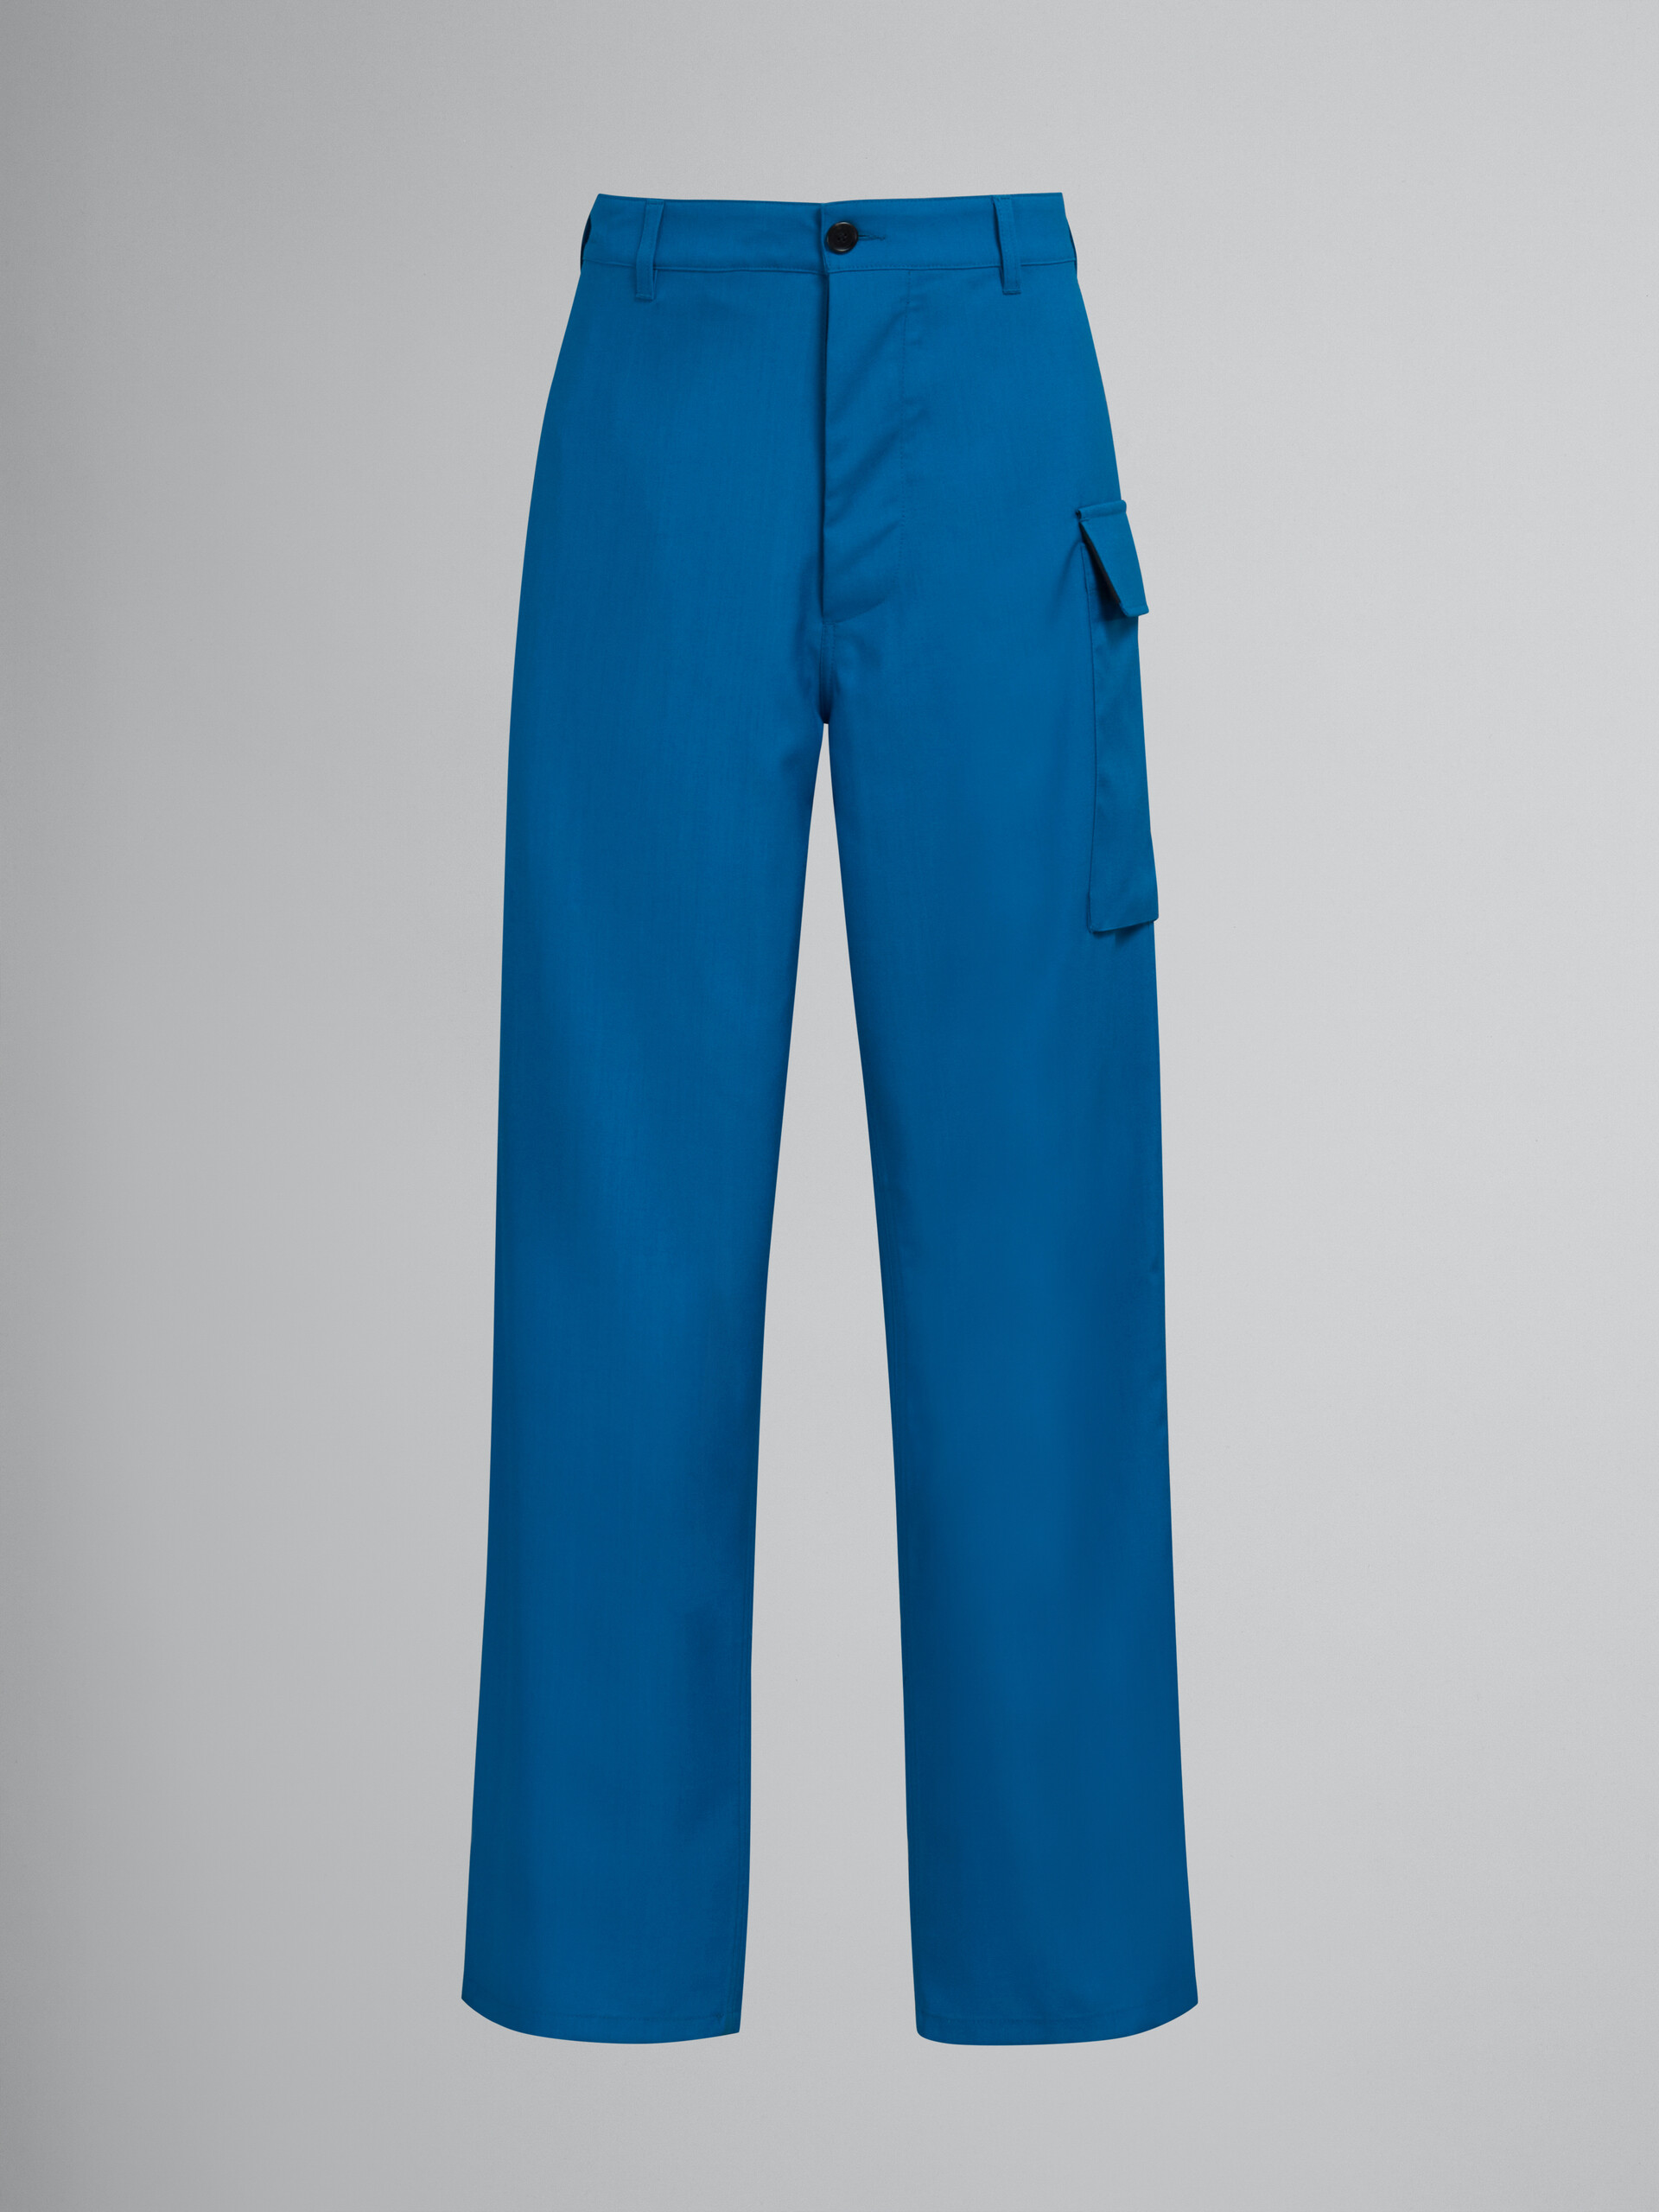 Teal tropical wool trousers with utility pocket - Pants - Image 1